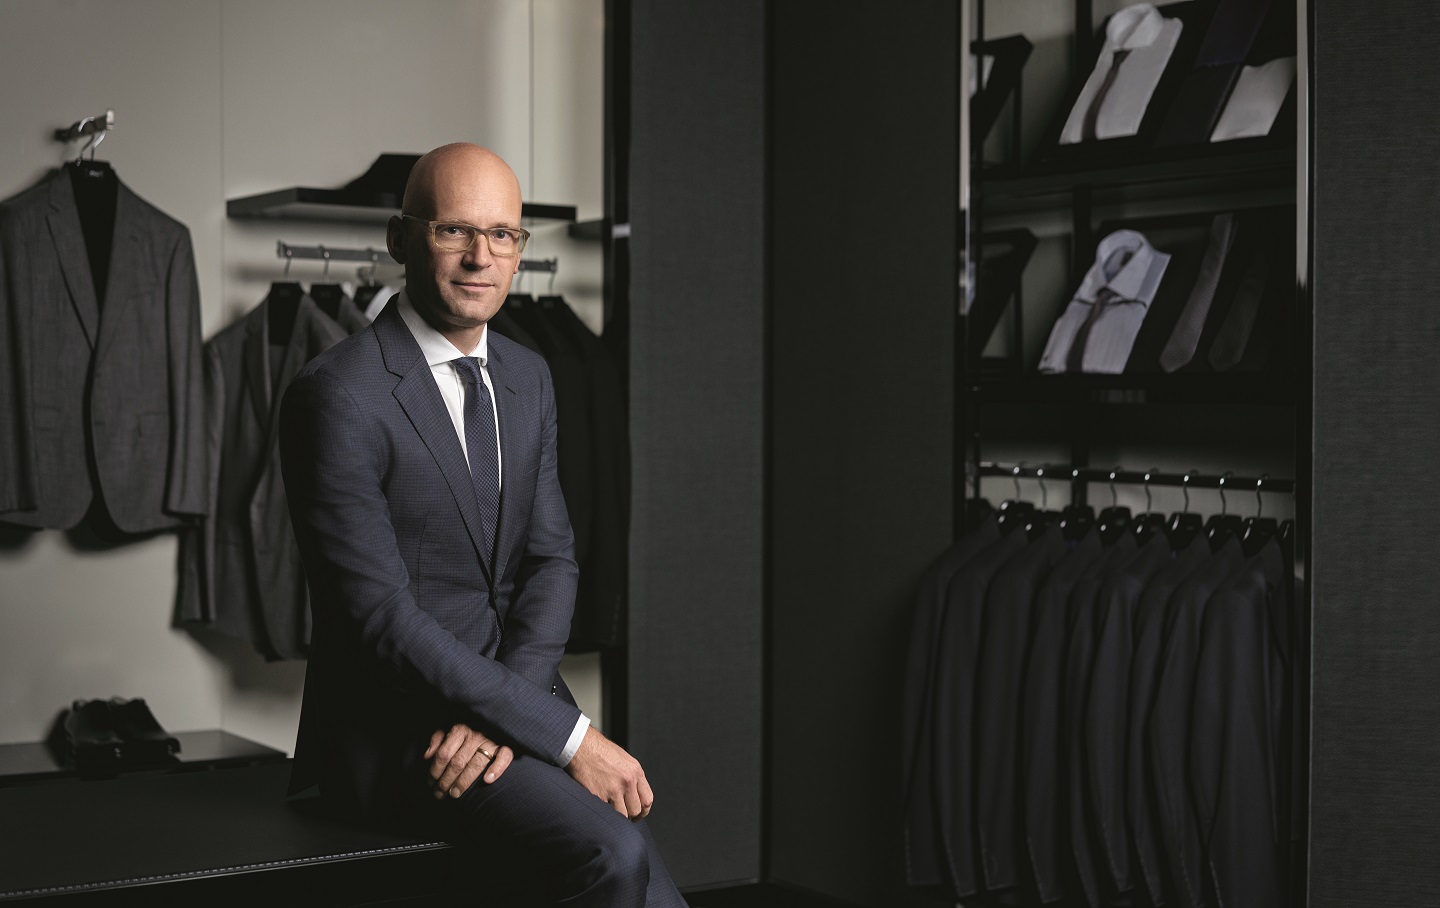 Hugo Boss CEO Mark Langer on what the future holds for menswear | Options,  The Edge